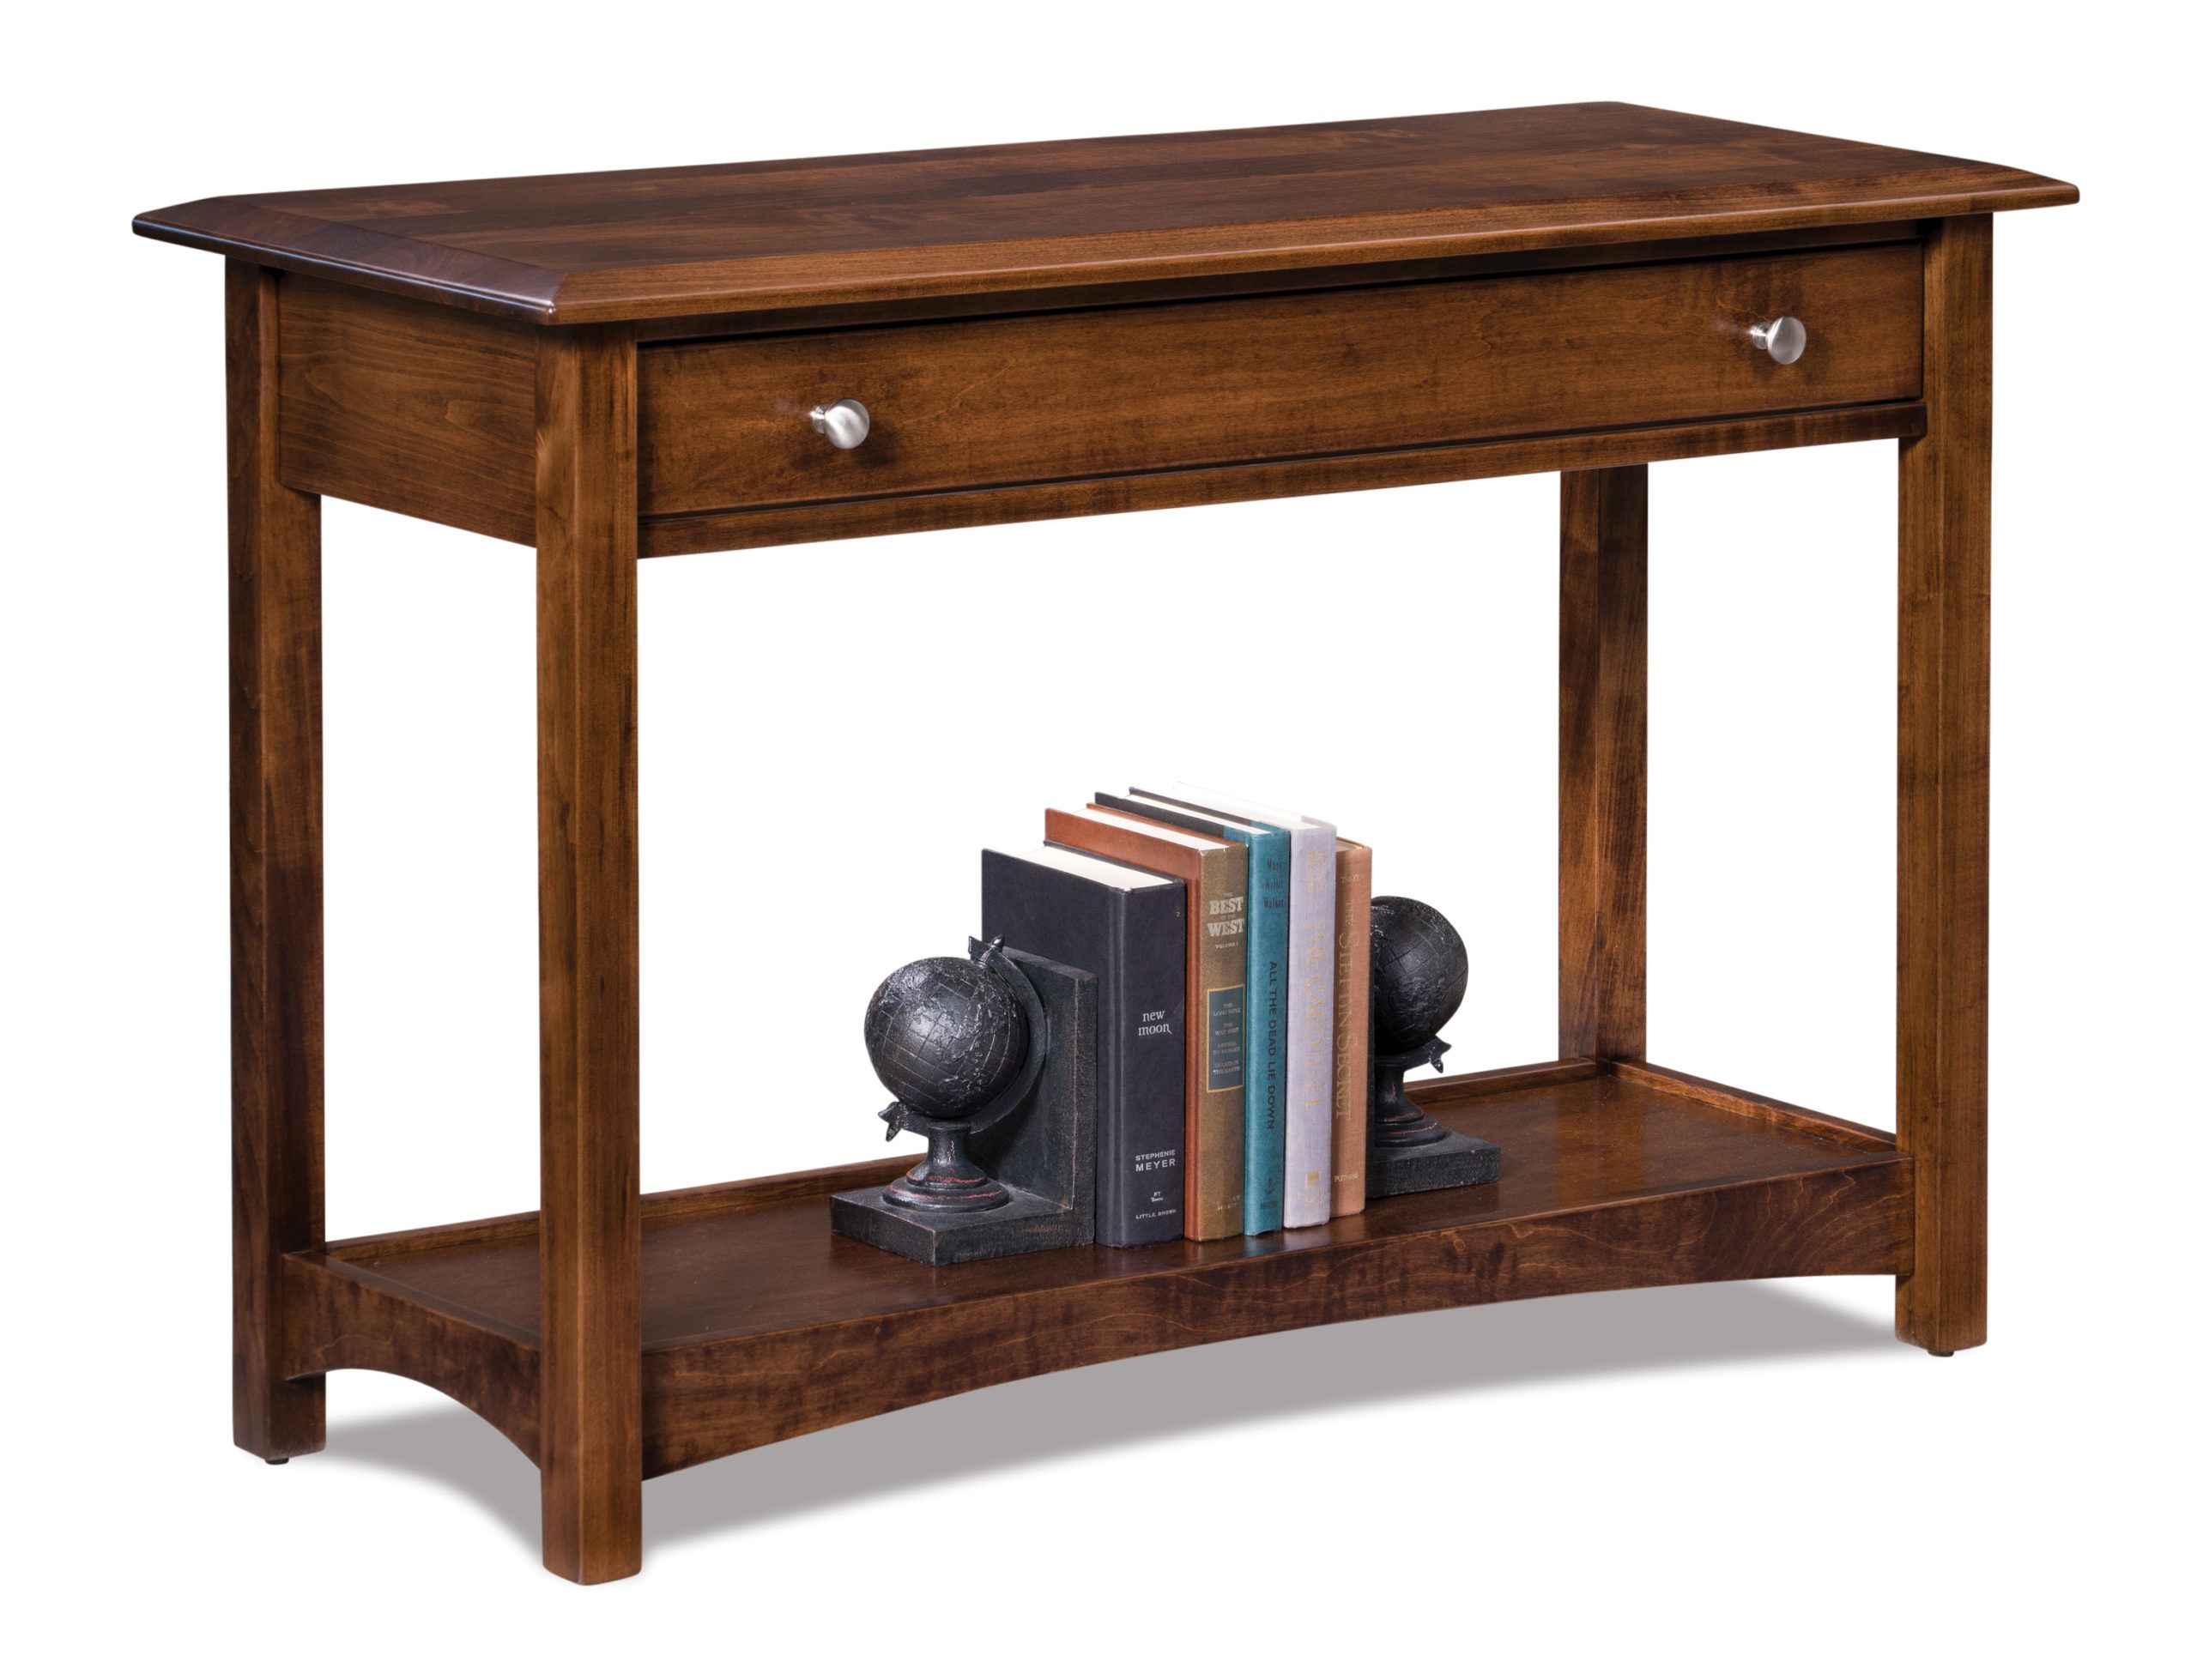 Finland Sofa Tables | Amish Solid Wood Occasional Tables Regarding Espresso Wood Storage Console Tables (View 3 of 20)